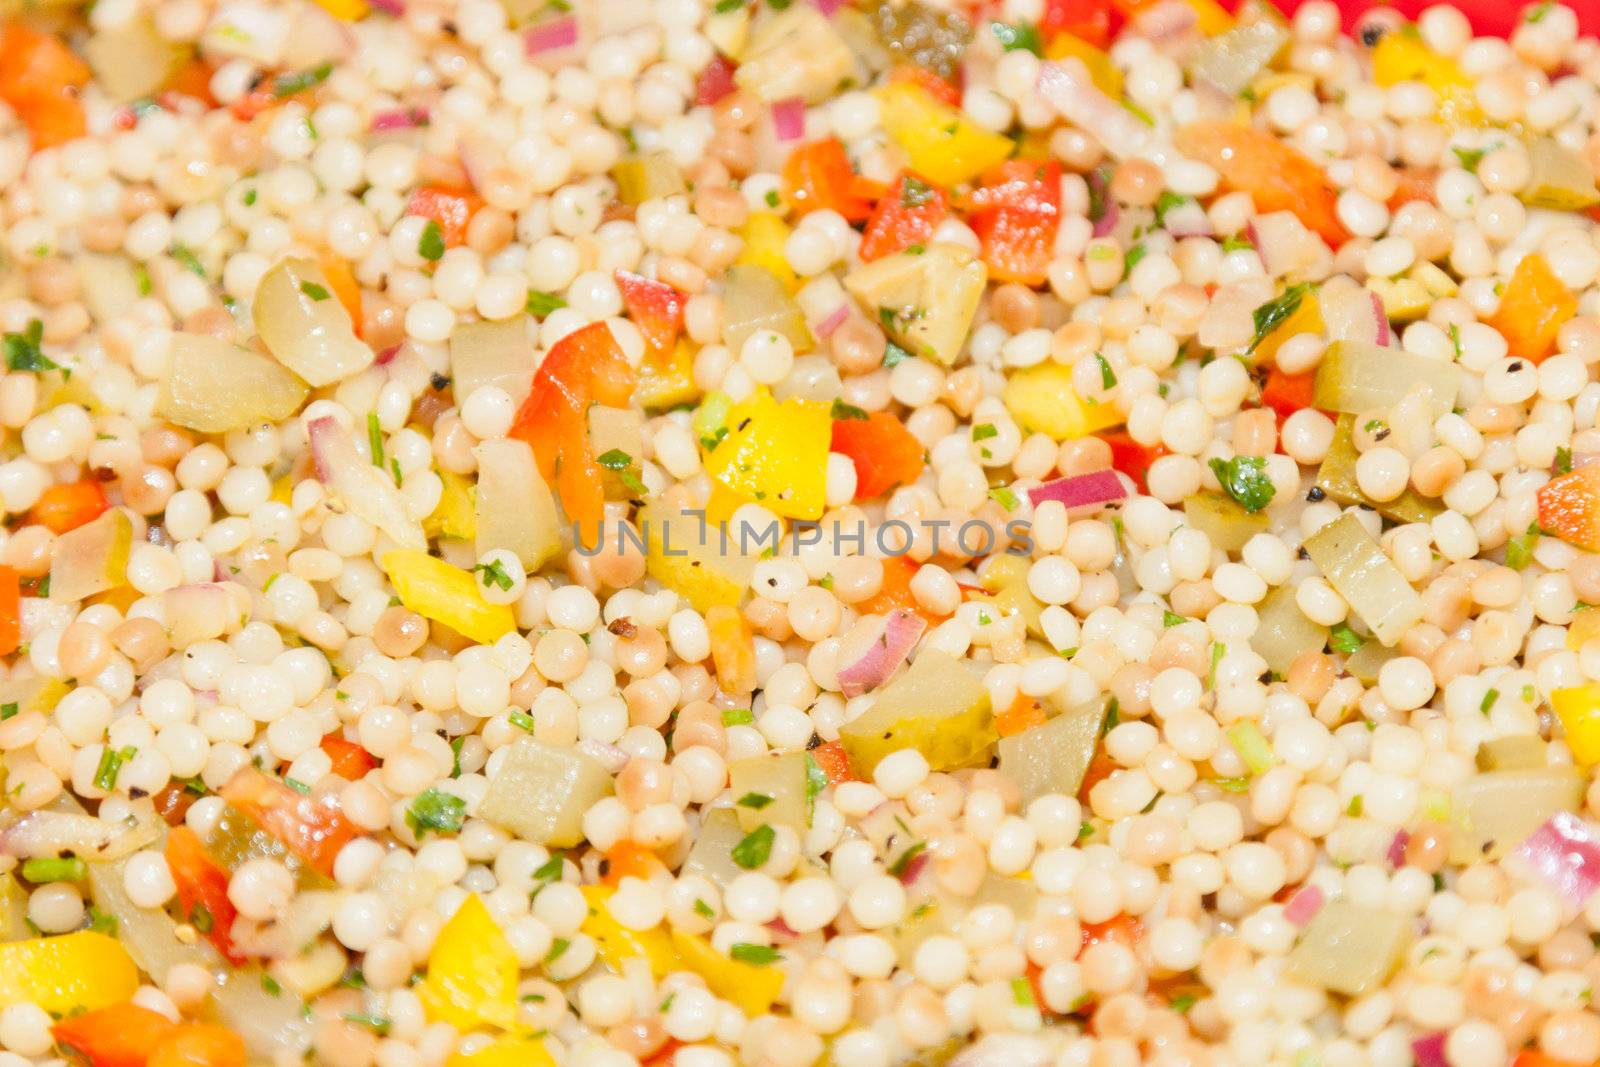 Couscous salad, with roasted red peppers, raisins, pine nuts, green onion